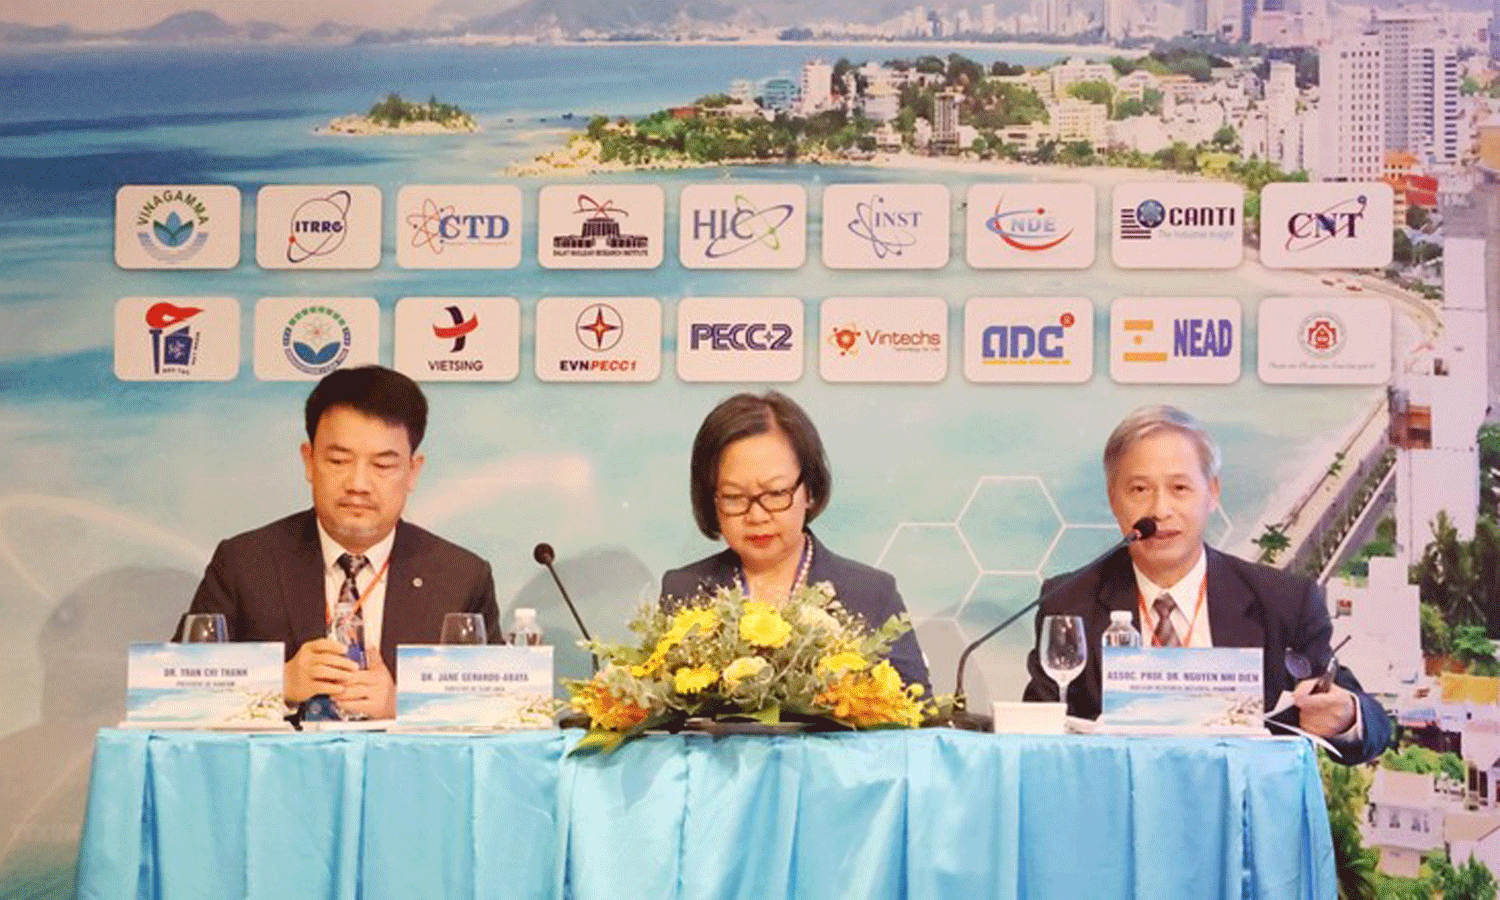 ABO/NDO- The 15th Vietnam National Conference on Nuclear Science and Technology opened on August 9 in the central coastal city of Nha Trang with the participation of nearly 450 experts and students from Vietnam and around the world.